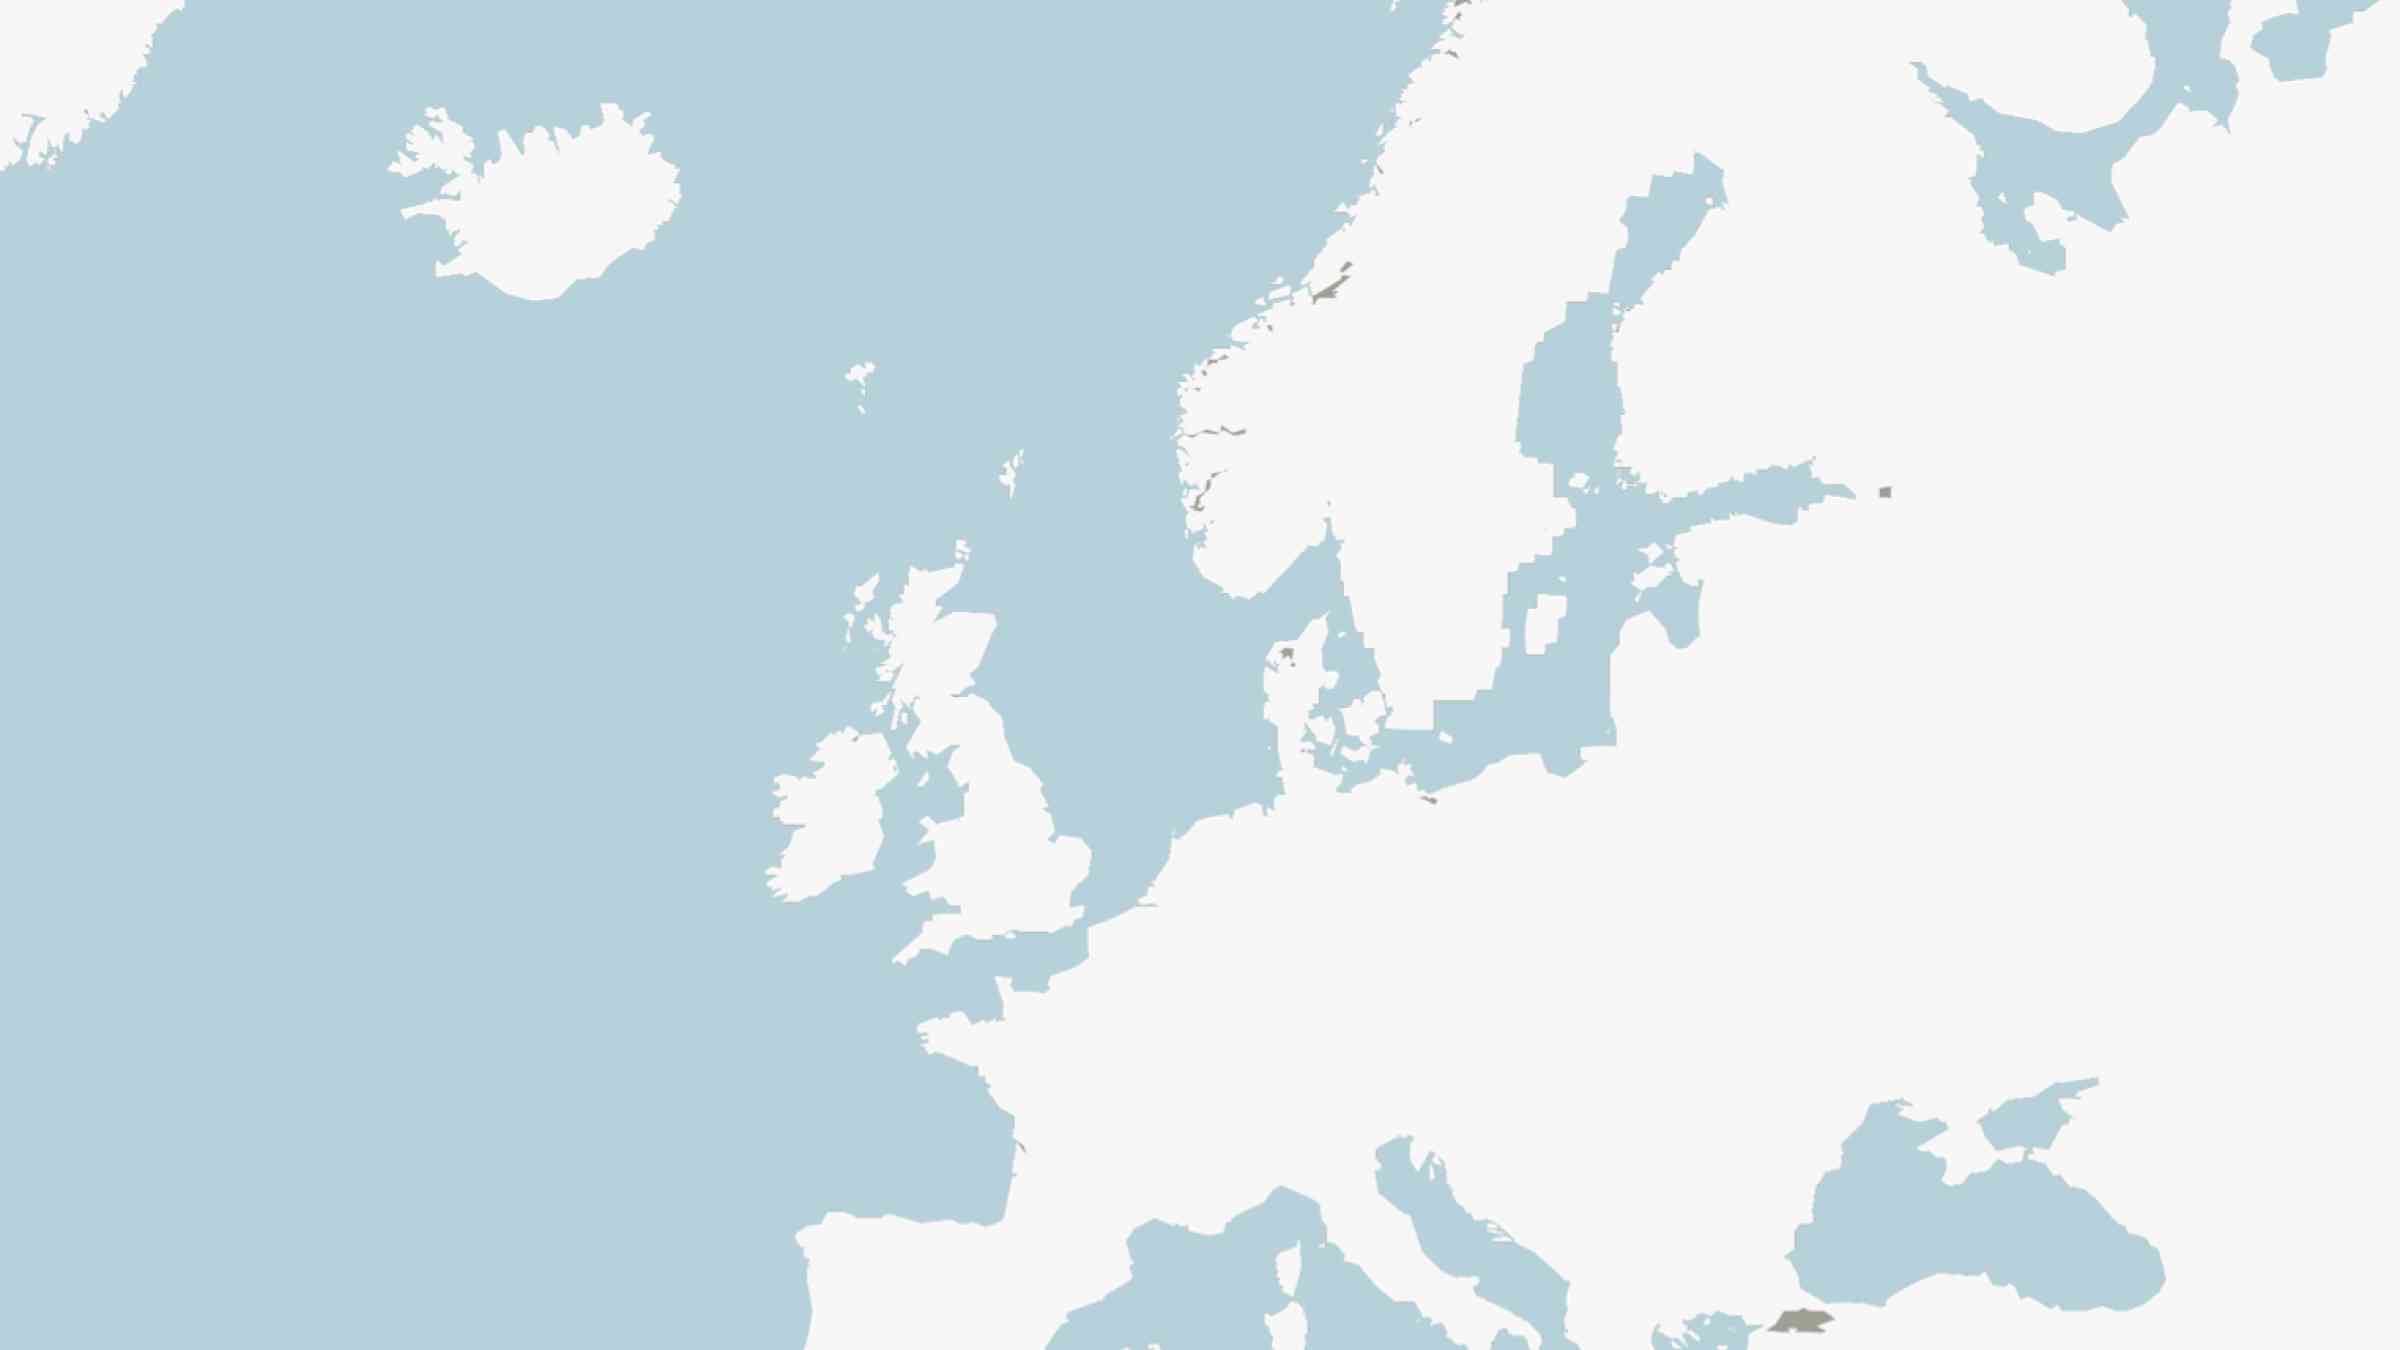 A blank map of Europe with a blue background 